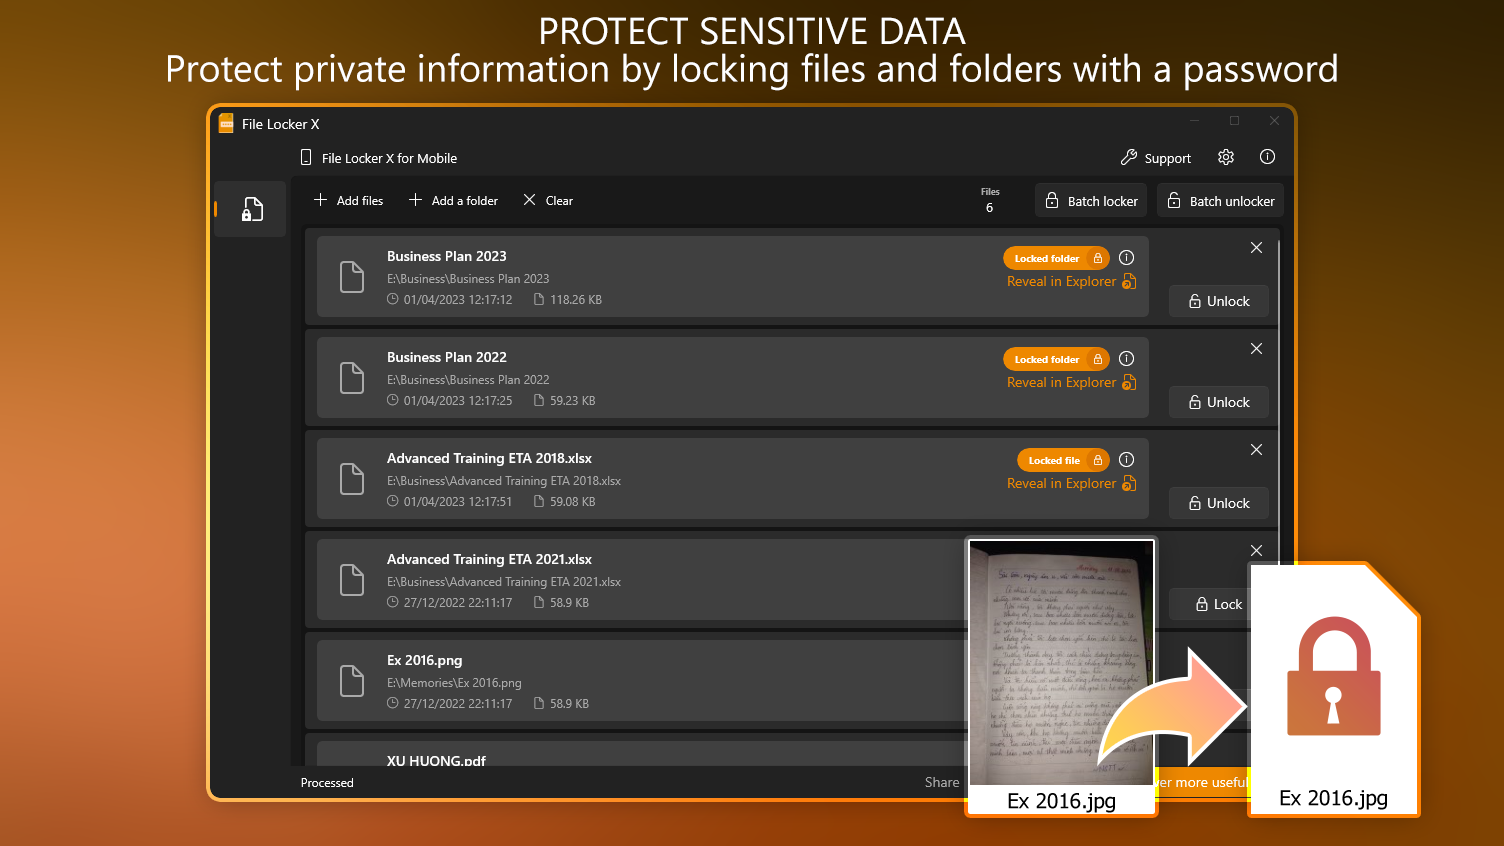 Protect Sensitive Data - Protect private information by locking files and folders with a password